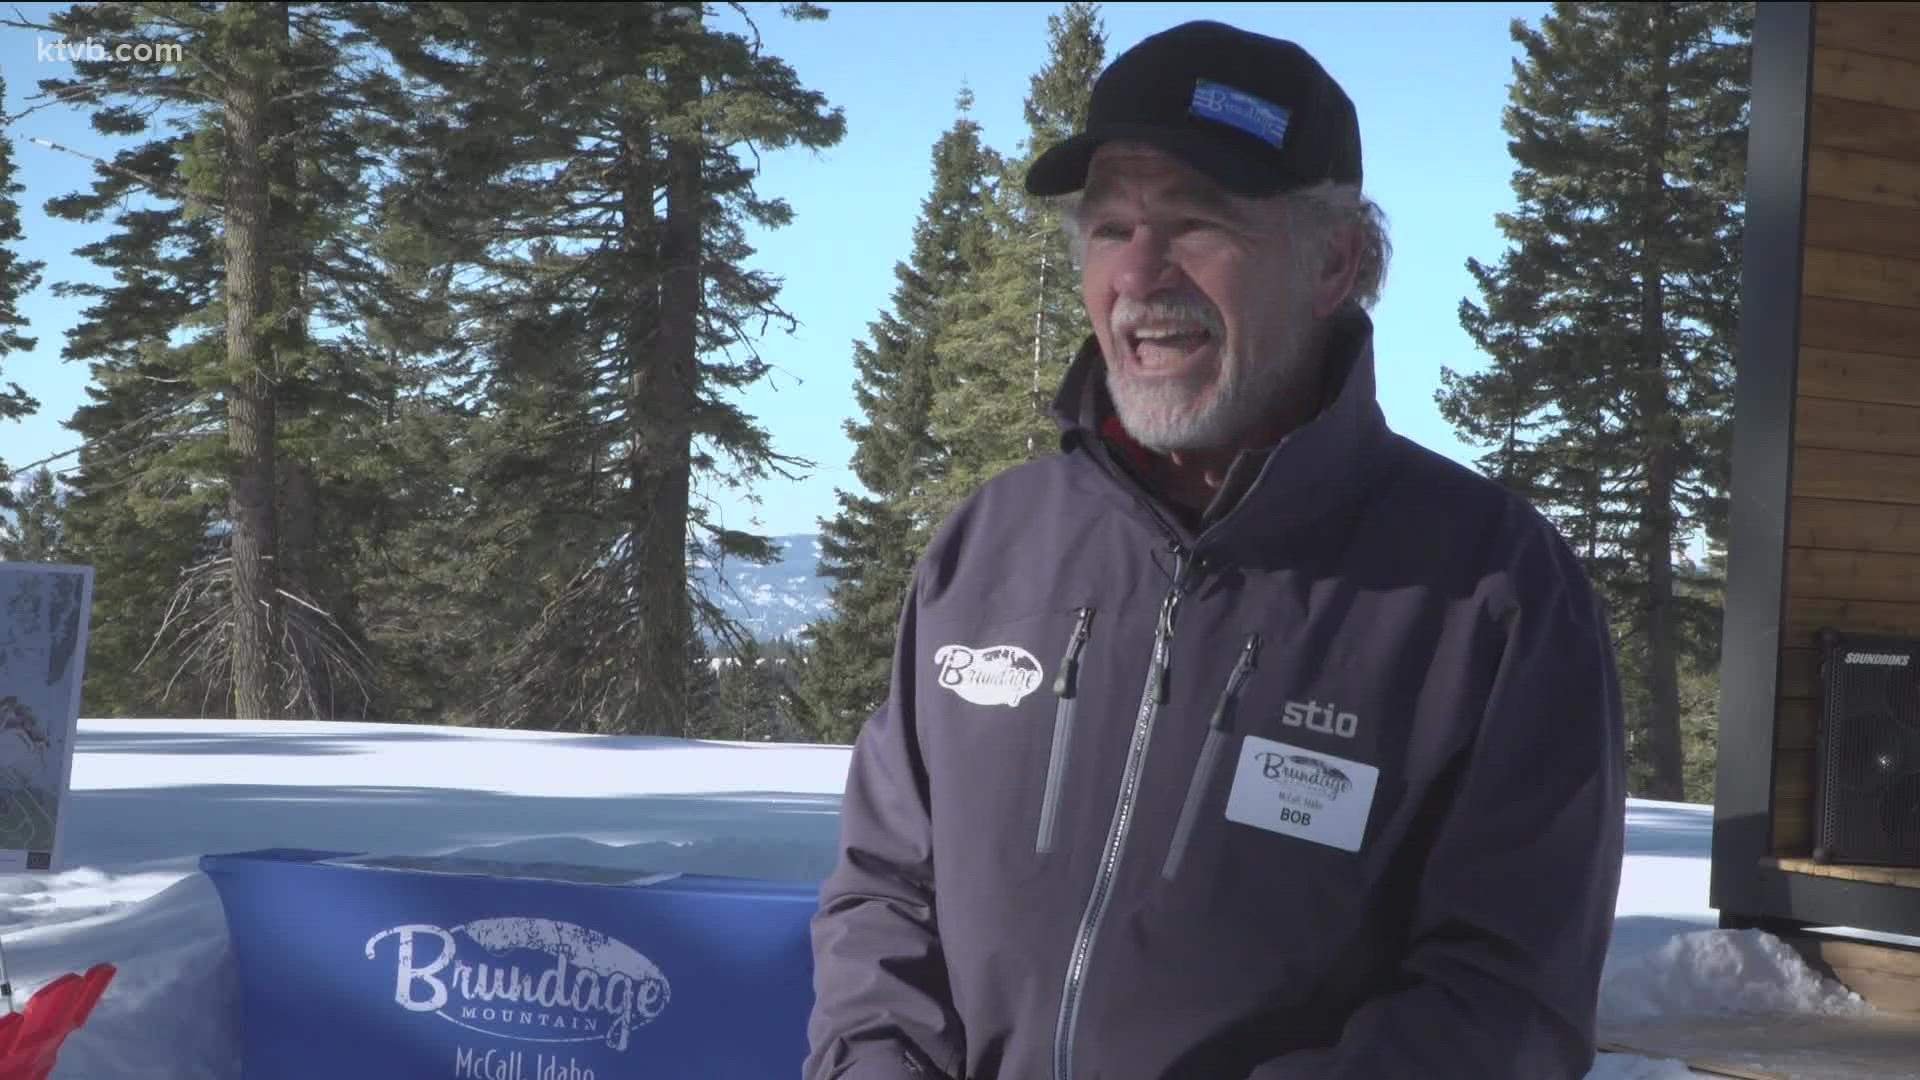 "We understand Brundage is different, we want it to be different. And it's those attributes drawing people here," Brundage Mountain Resort President Bob Looper said.